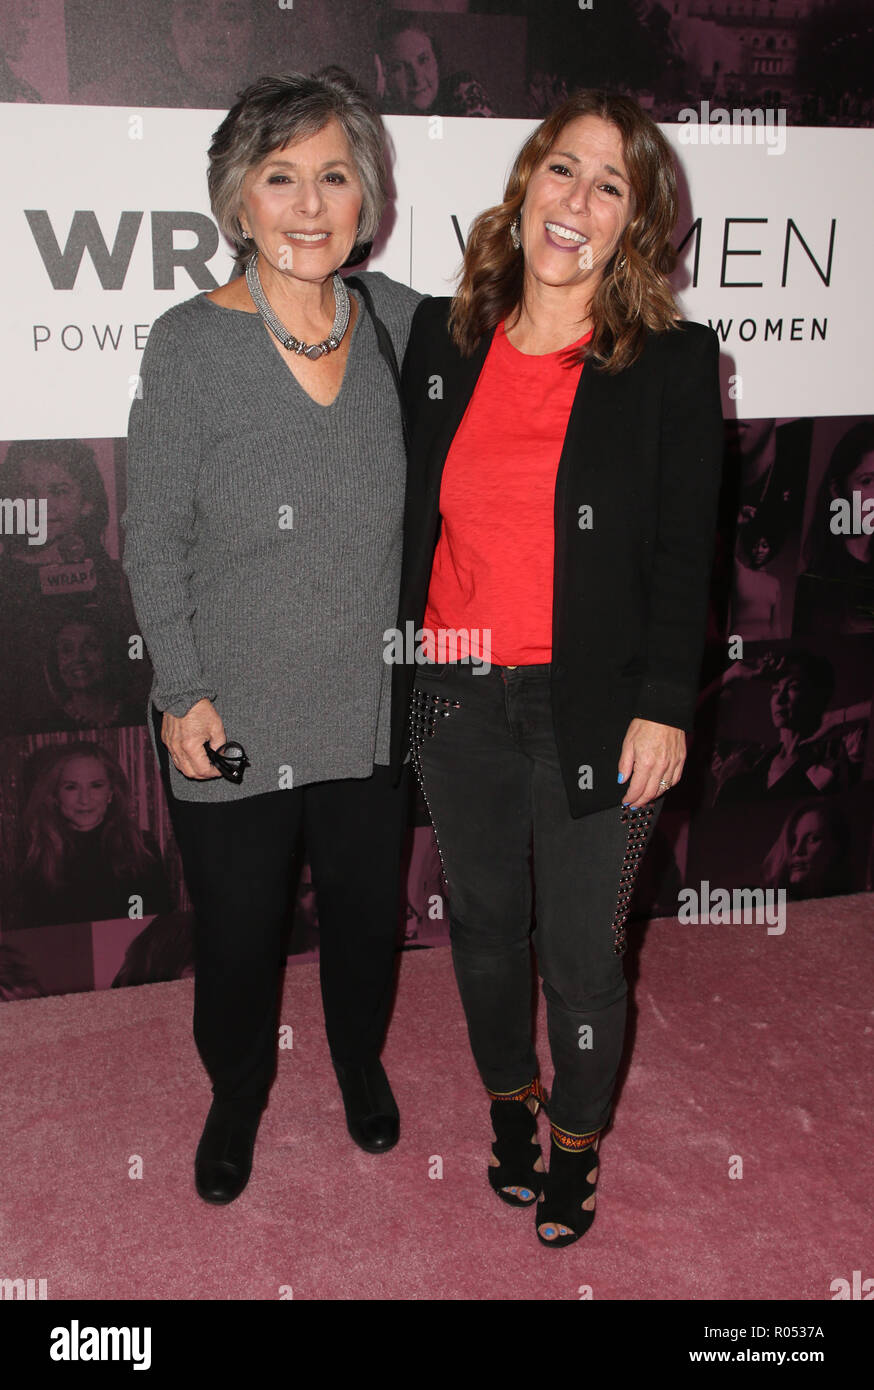 Los Angeles, Ca, USA. 1st Nov, 2018. Barbara Boxer and Nicole Boxer at TheWraps Power Womens Summit at the InterContinental Hotel in Los Angeles, California on November 1, 2018. Credit: Faye Sadou/Media Punch/Alamy Live News Stock Photo